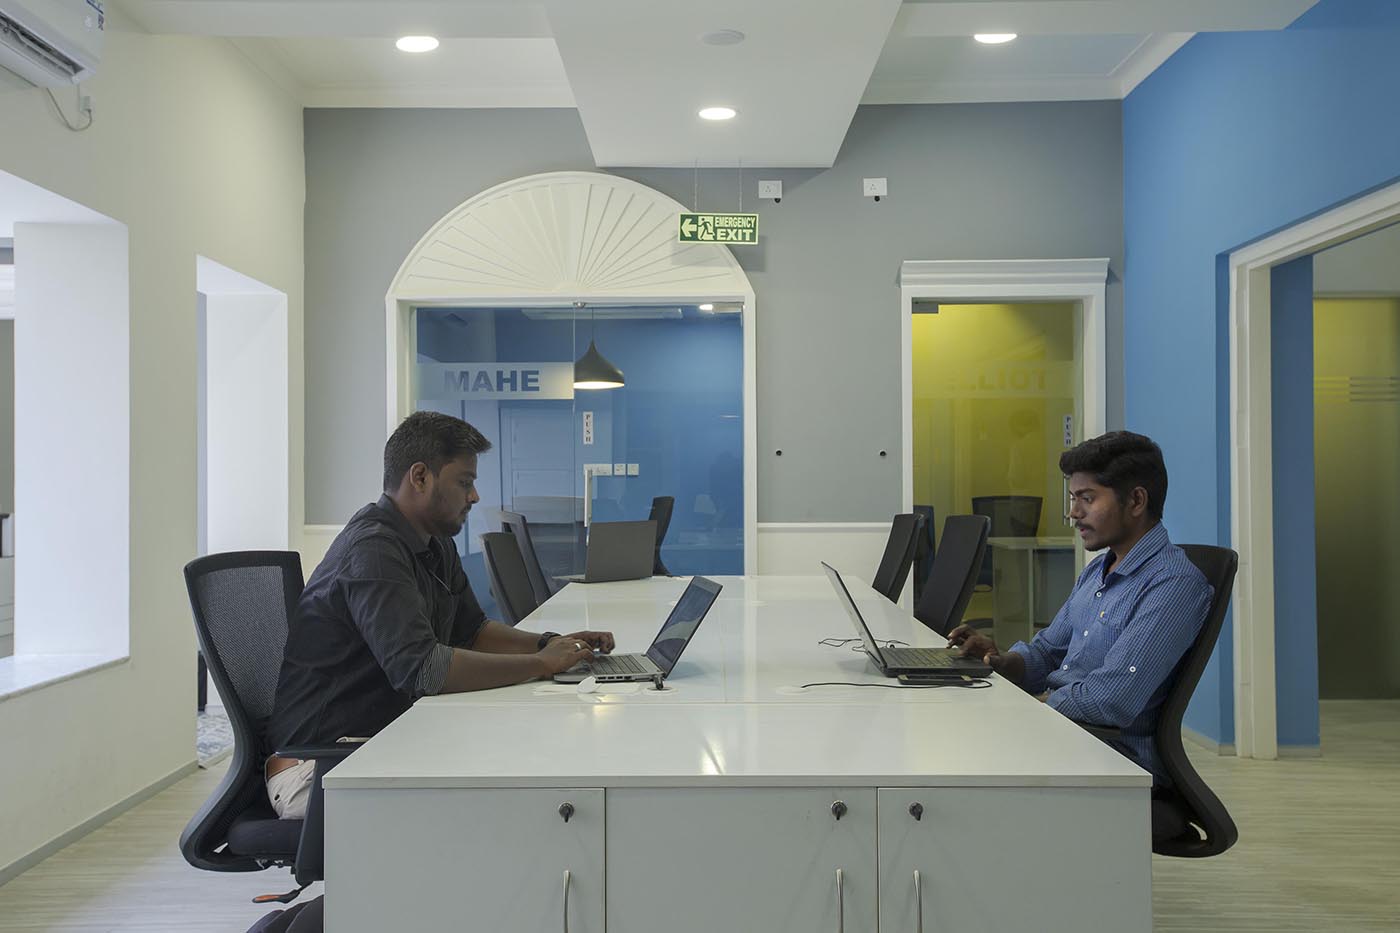 Cove Offices’ shared workspaces for rent